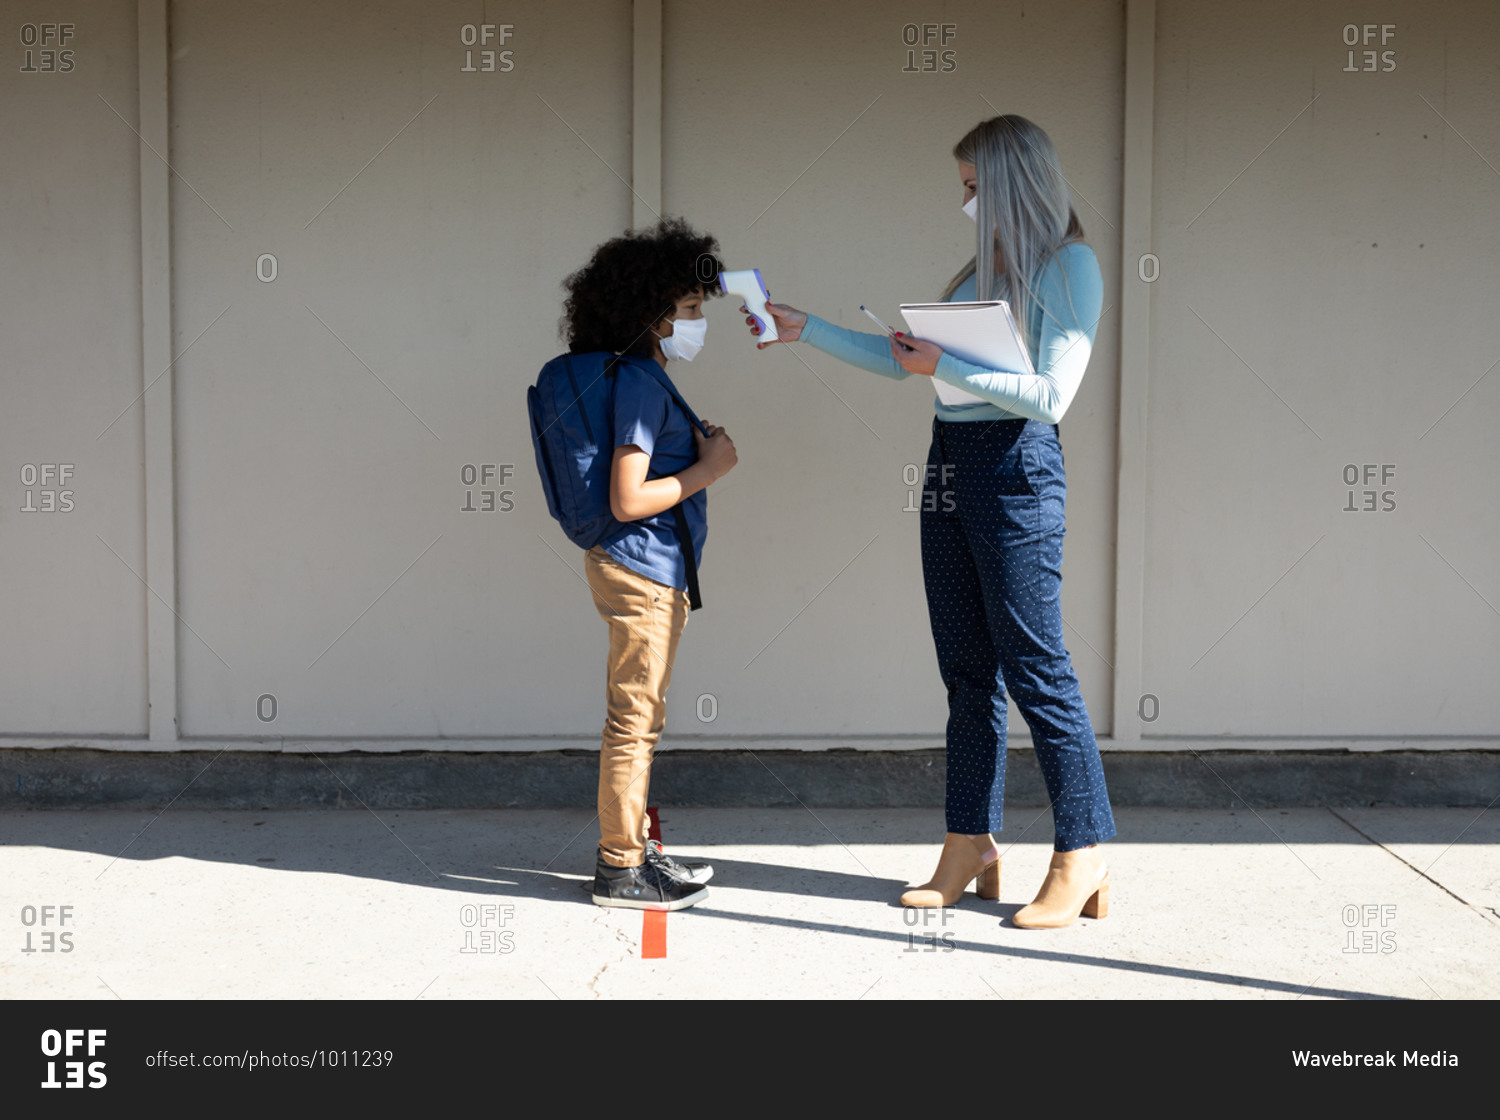 Caucasian female teacher wearing face mask measuring temperature of a boy in an elementary school. Primary education social distancing health safety during Covid19 Coronavirus pandemic.